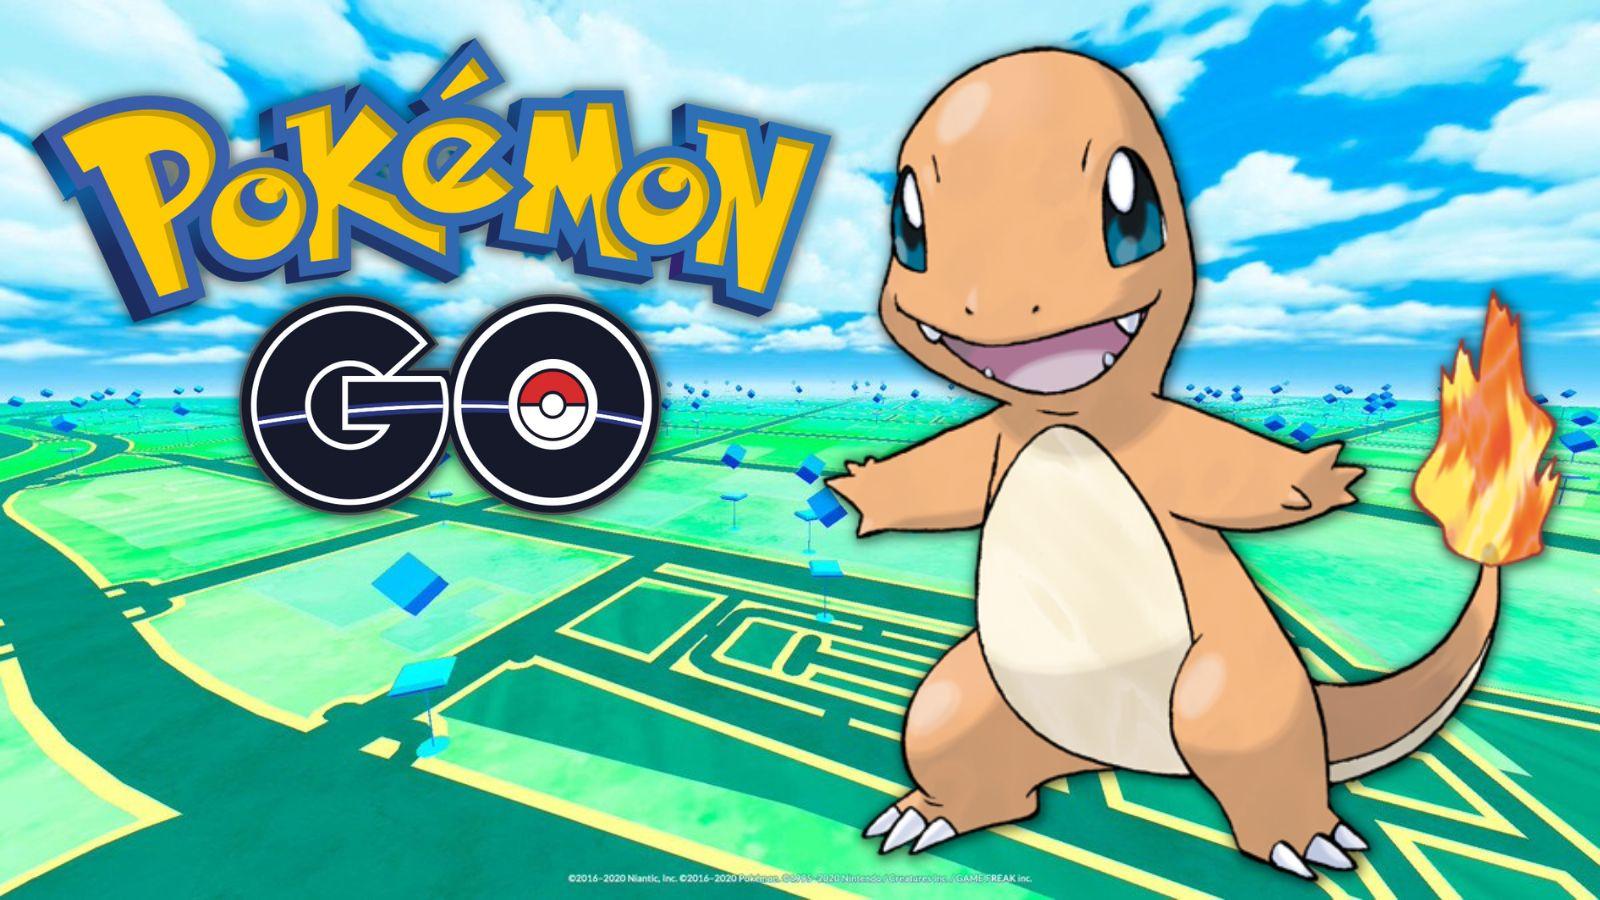 Pokemon Go Charmander Community Day Classic Special Research tasks